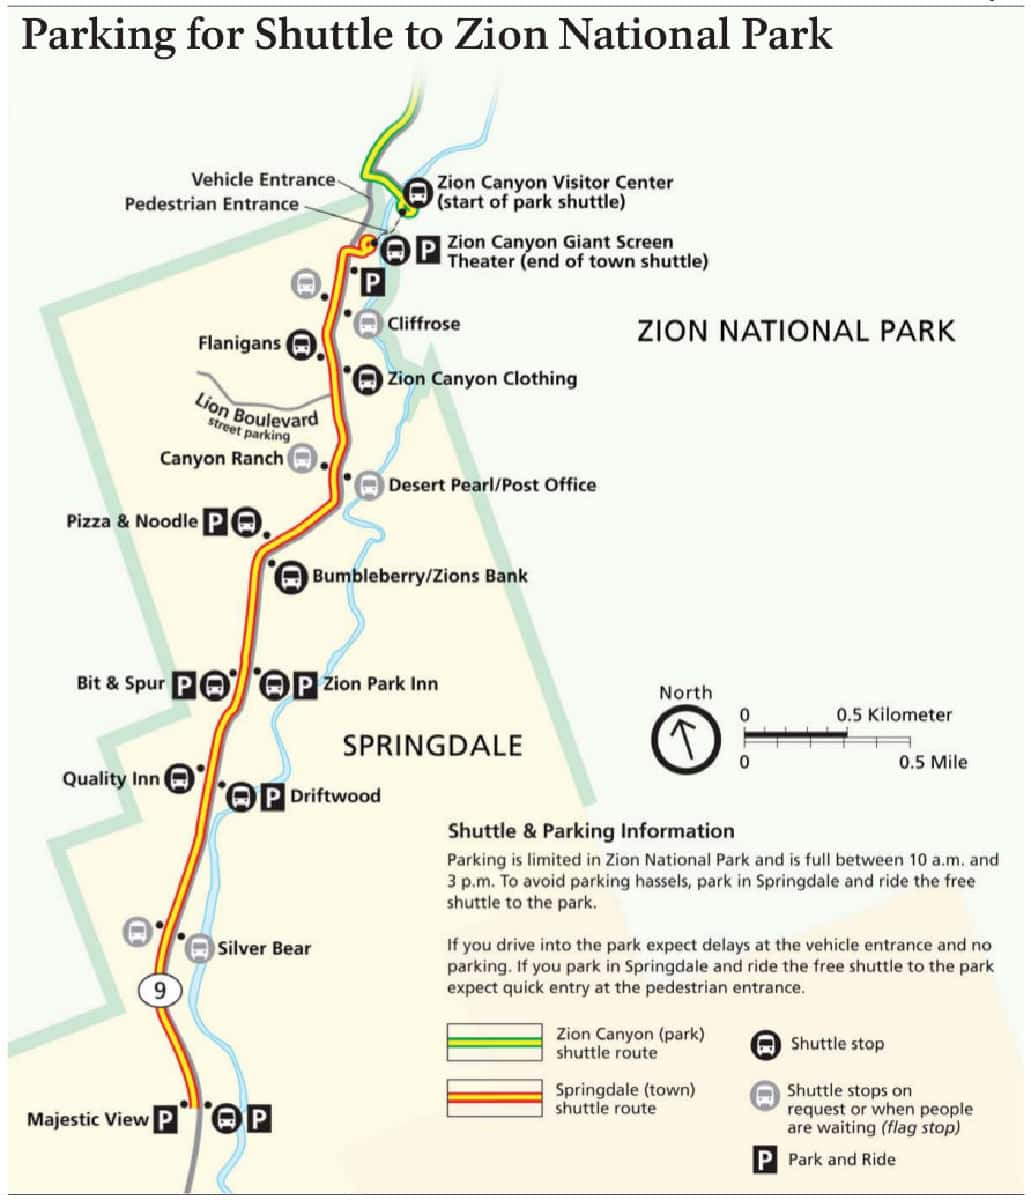 Free Springdale bus shuttle that takes you from the South entrance of Zion National Park to several locations listed on the map in Springdale, Utah